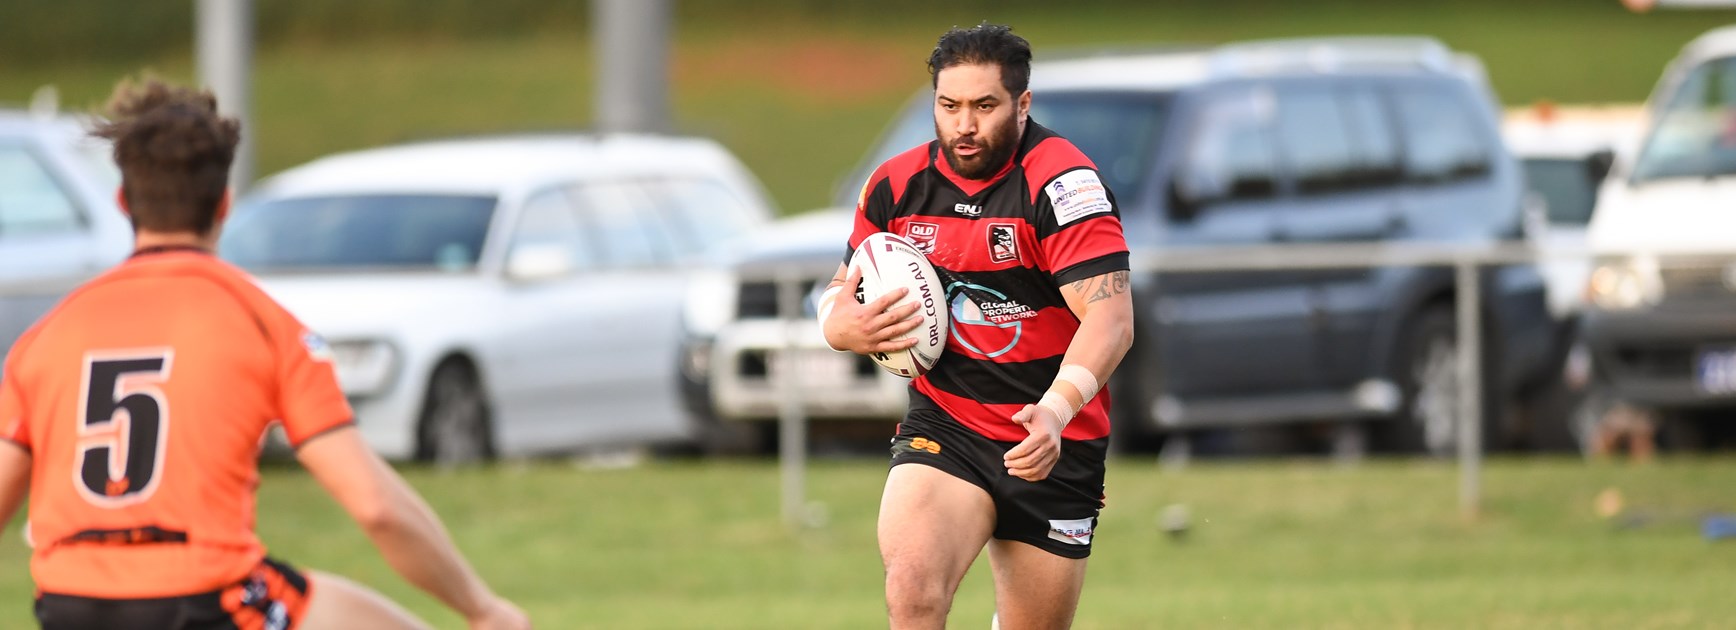 Table-topping clash headlines In Safe Hands Cup Round 11